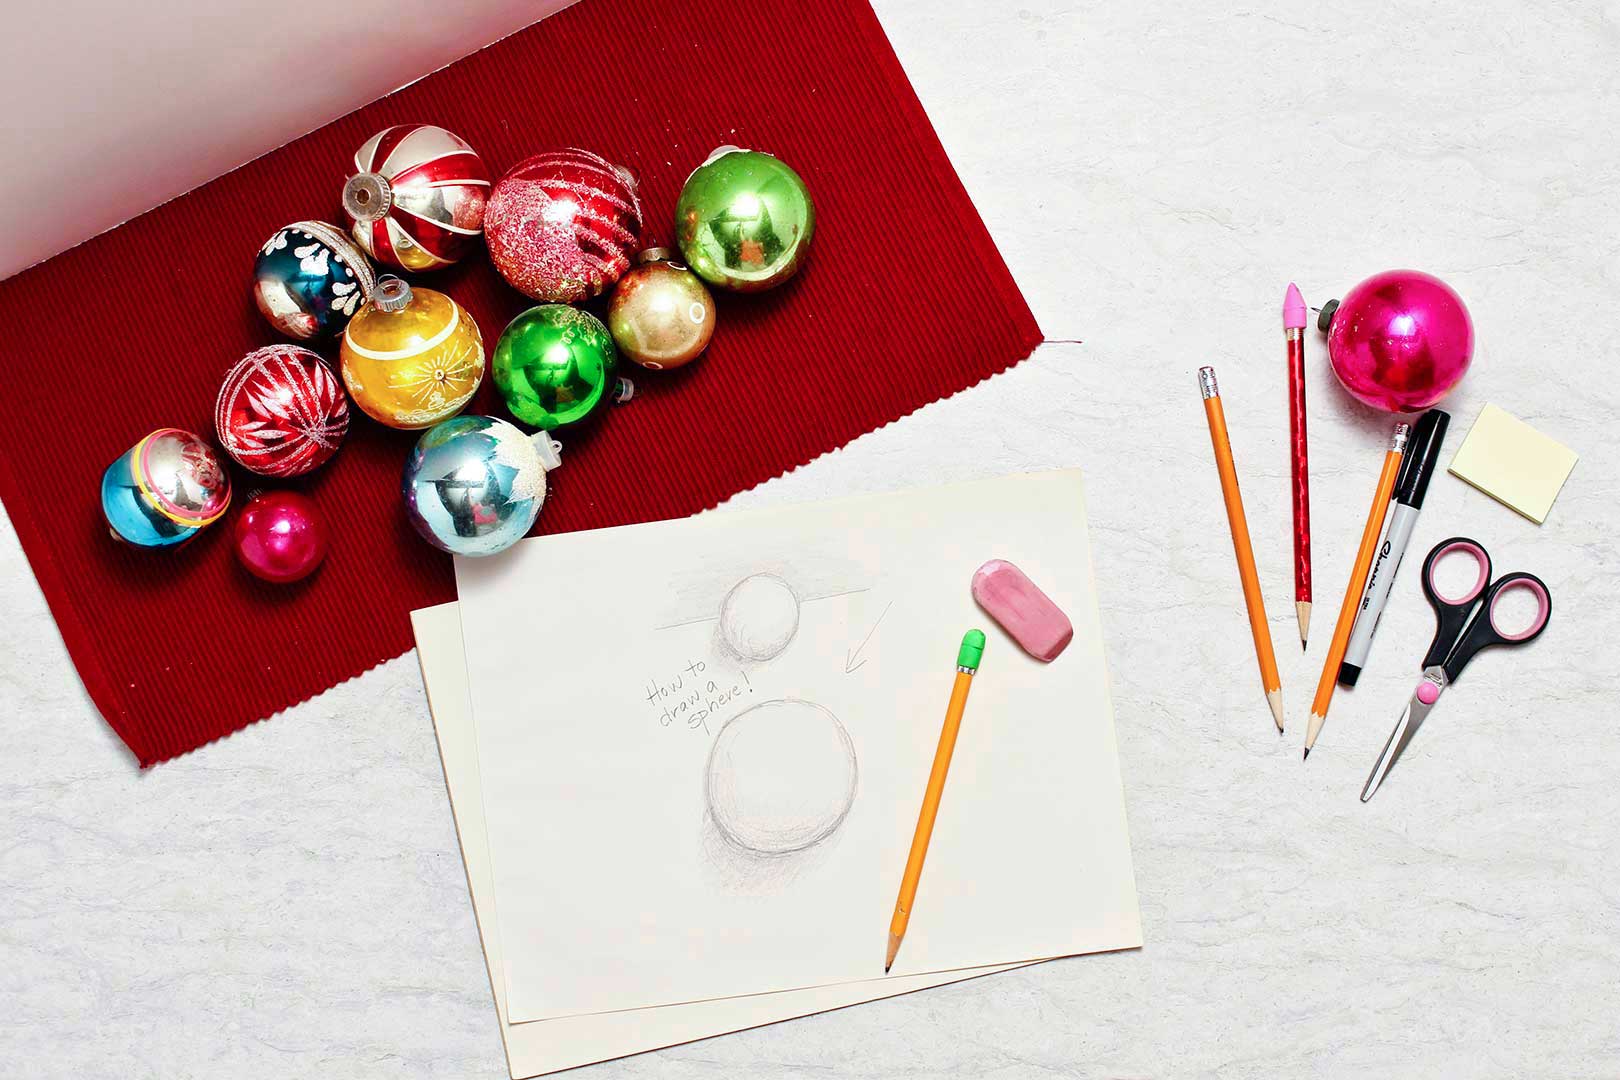 Christmas Stuff Drawing - How To Draw Christmas Stuff Step By Step